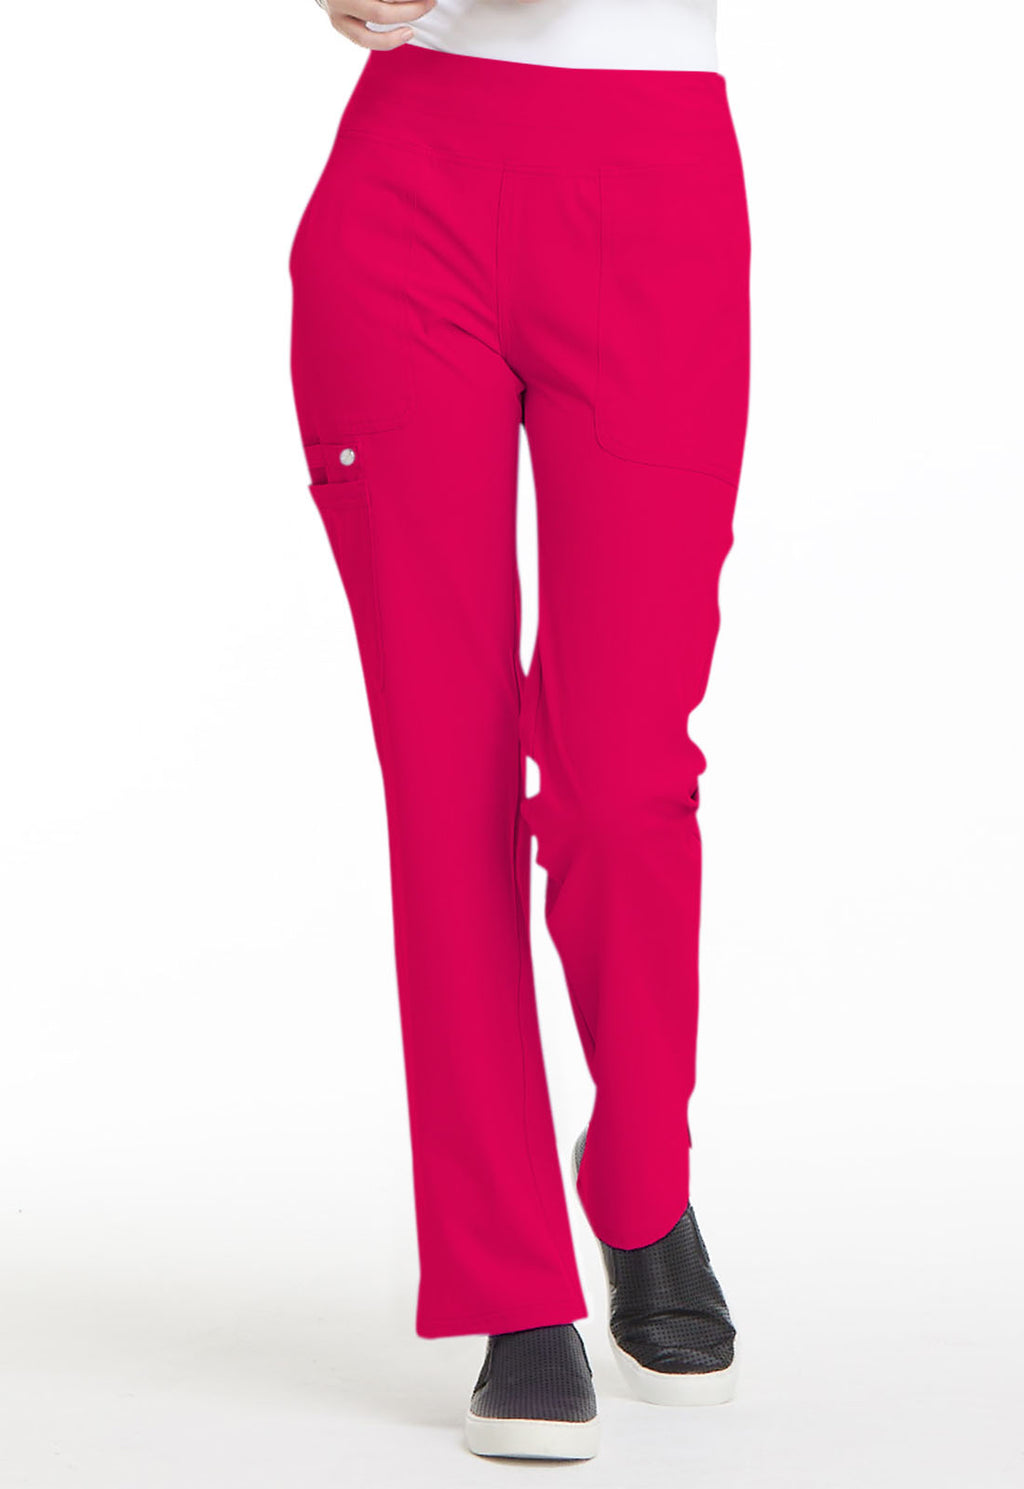 Elle Simply Polished Mid Rise Straight Leg Pull-on Pant in Rouge